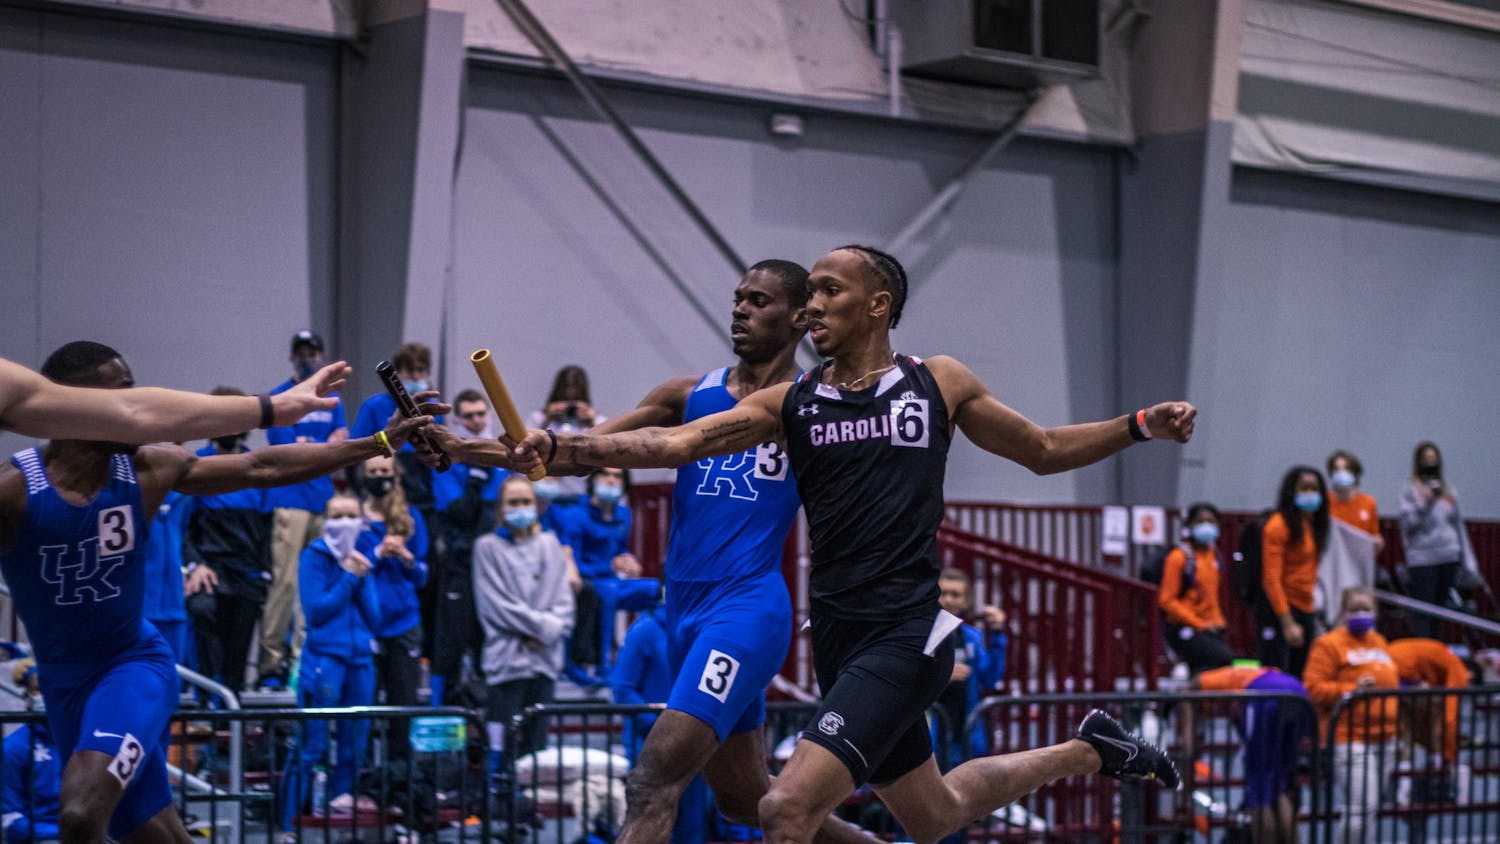 &nbsp;Sophomore EJ Richardson passes the baton to his teammate during a relay race.&nbsp;